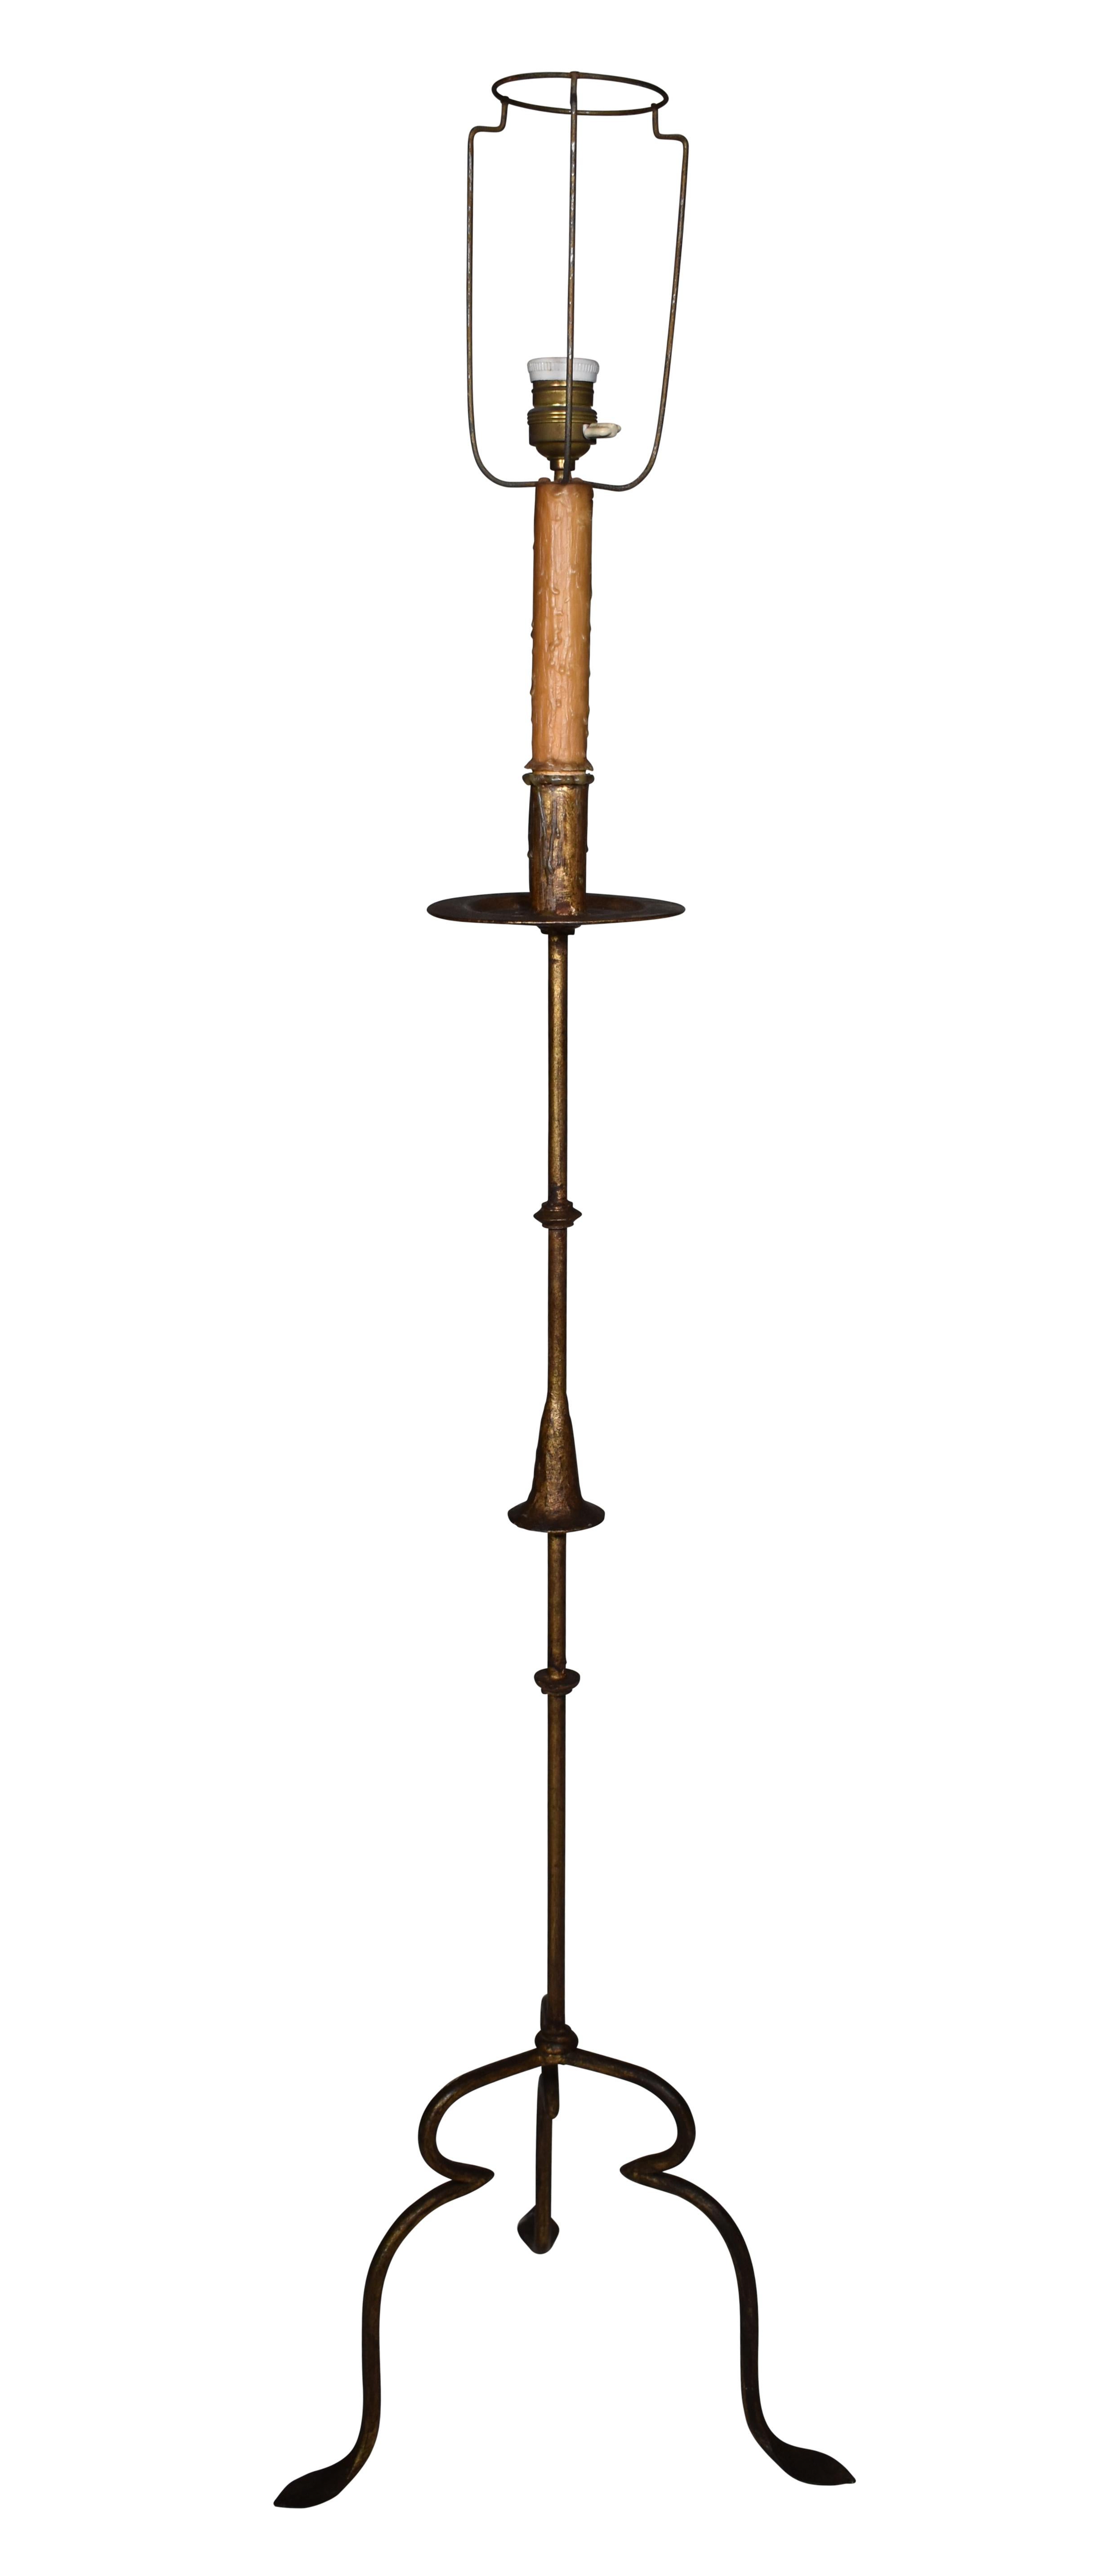 Vintage, French gilded iron floor lamp. European wiring - must be rewired to use in US.